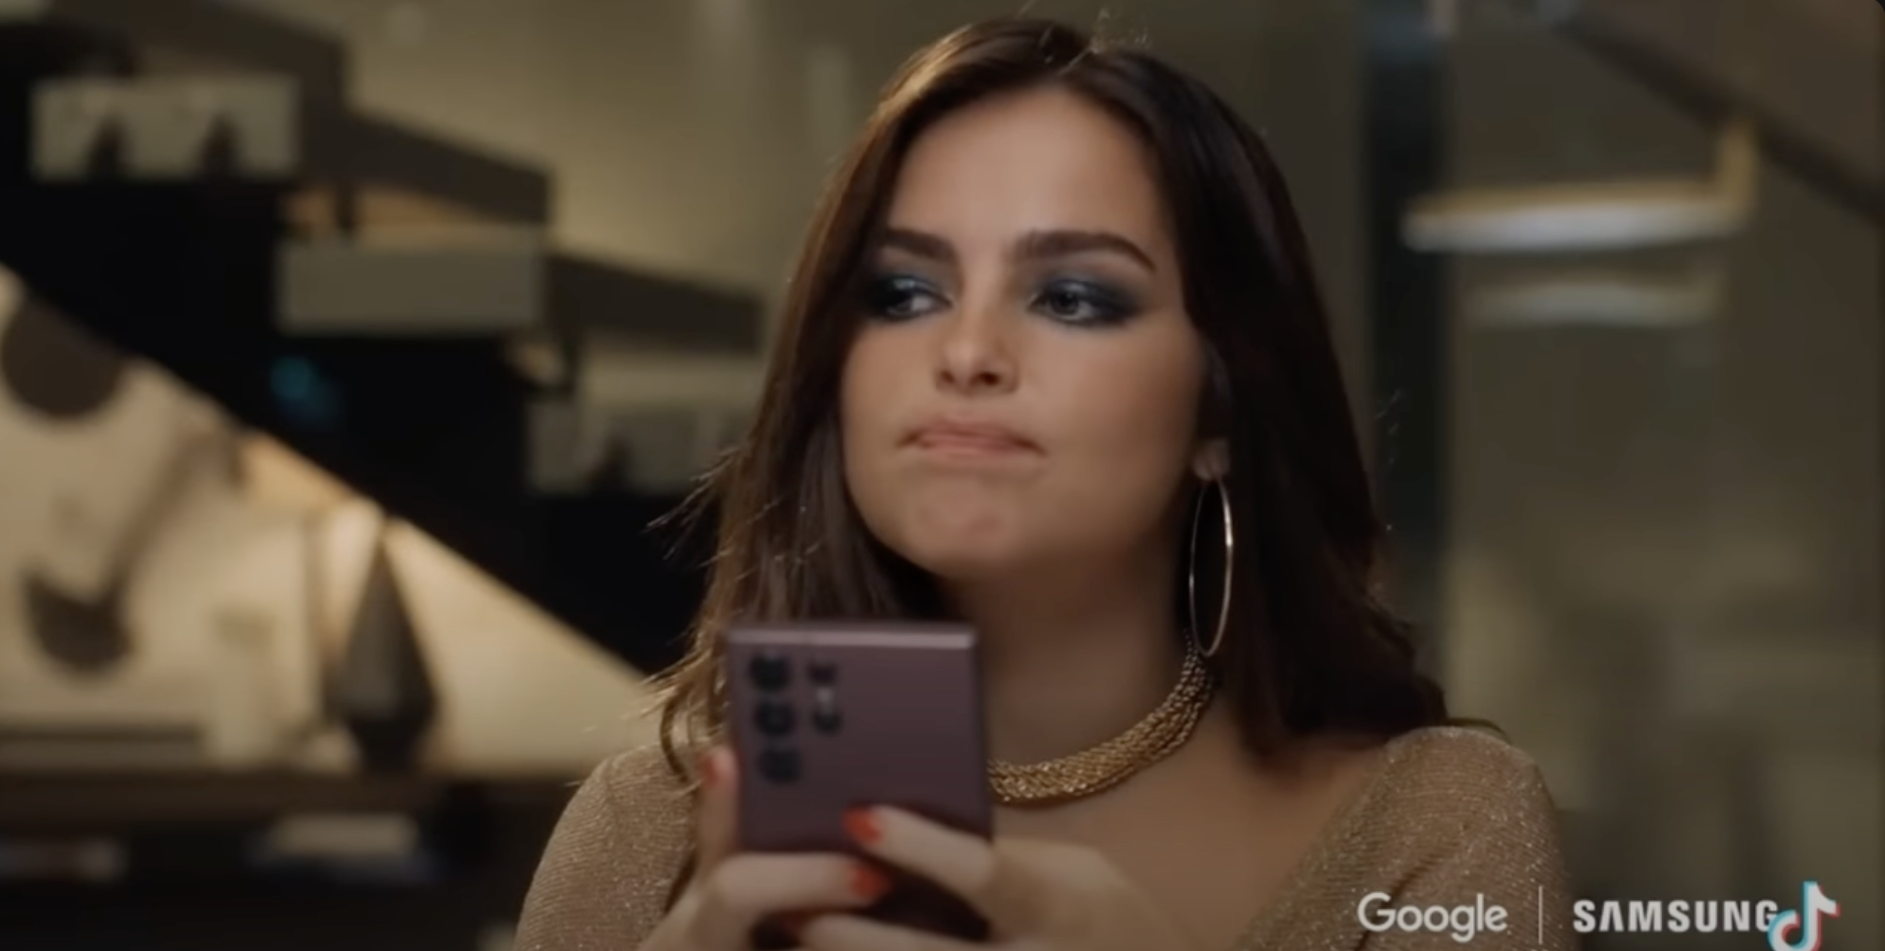 Addison Rae is in a Samsung commercial